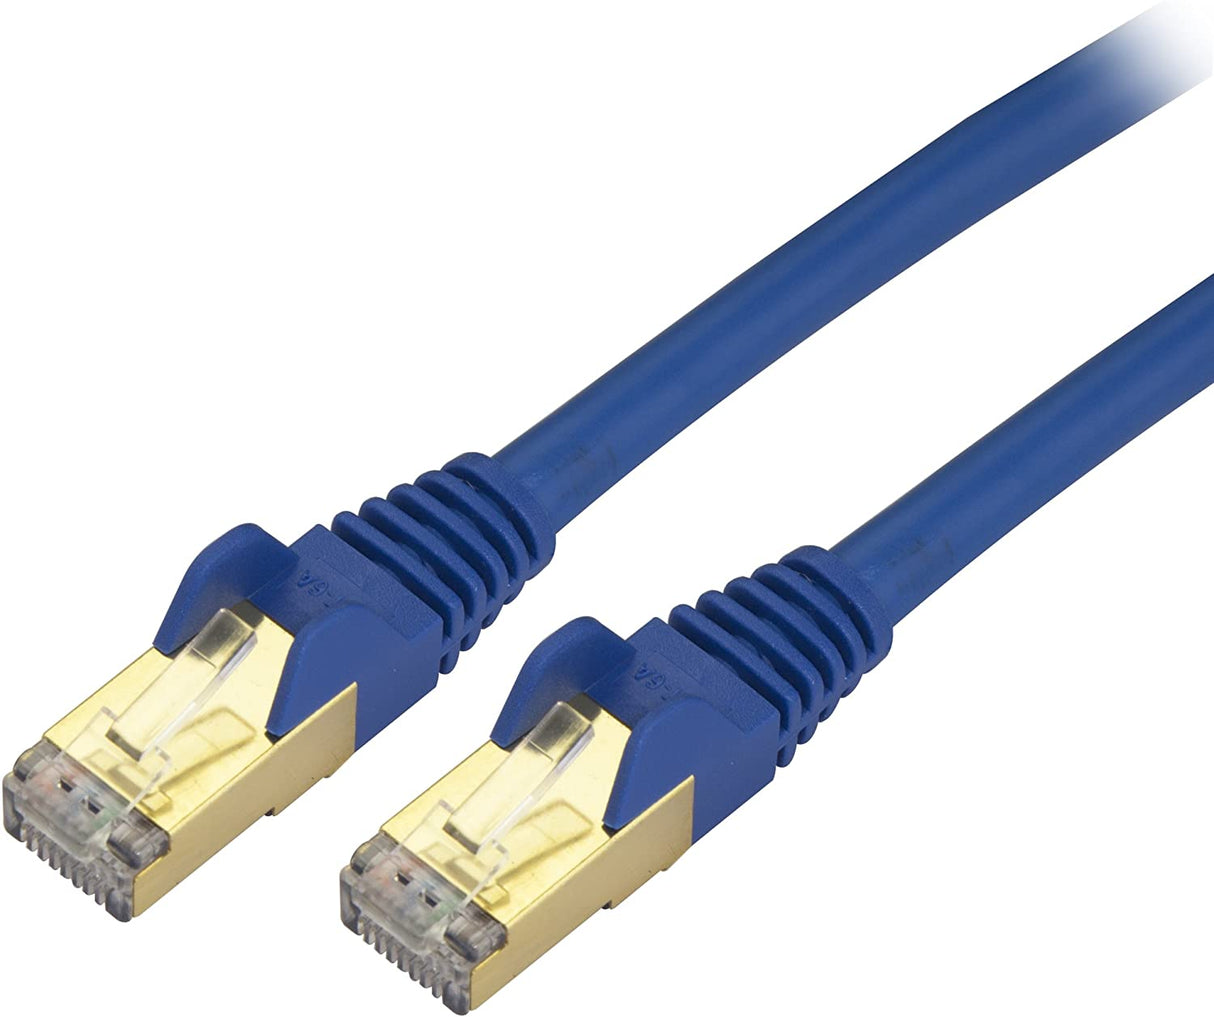 StarTech.com 12 ft / 3.5m CAT6a Ethernet Cable - 10 Gigabit Shielded Snagless RJ45 100W PoE Patch Cord - 10GbE STP Category 6a Network Cable - Blue Fluke Tested UL/TIA Certified (C6ASPAT12BL) 12 ft / 3.5m Blue